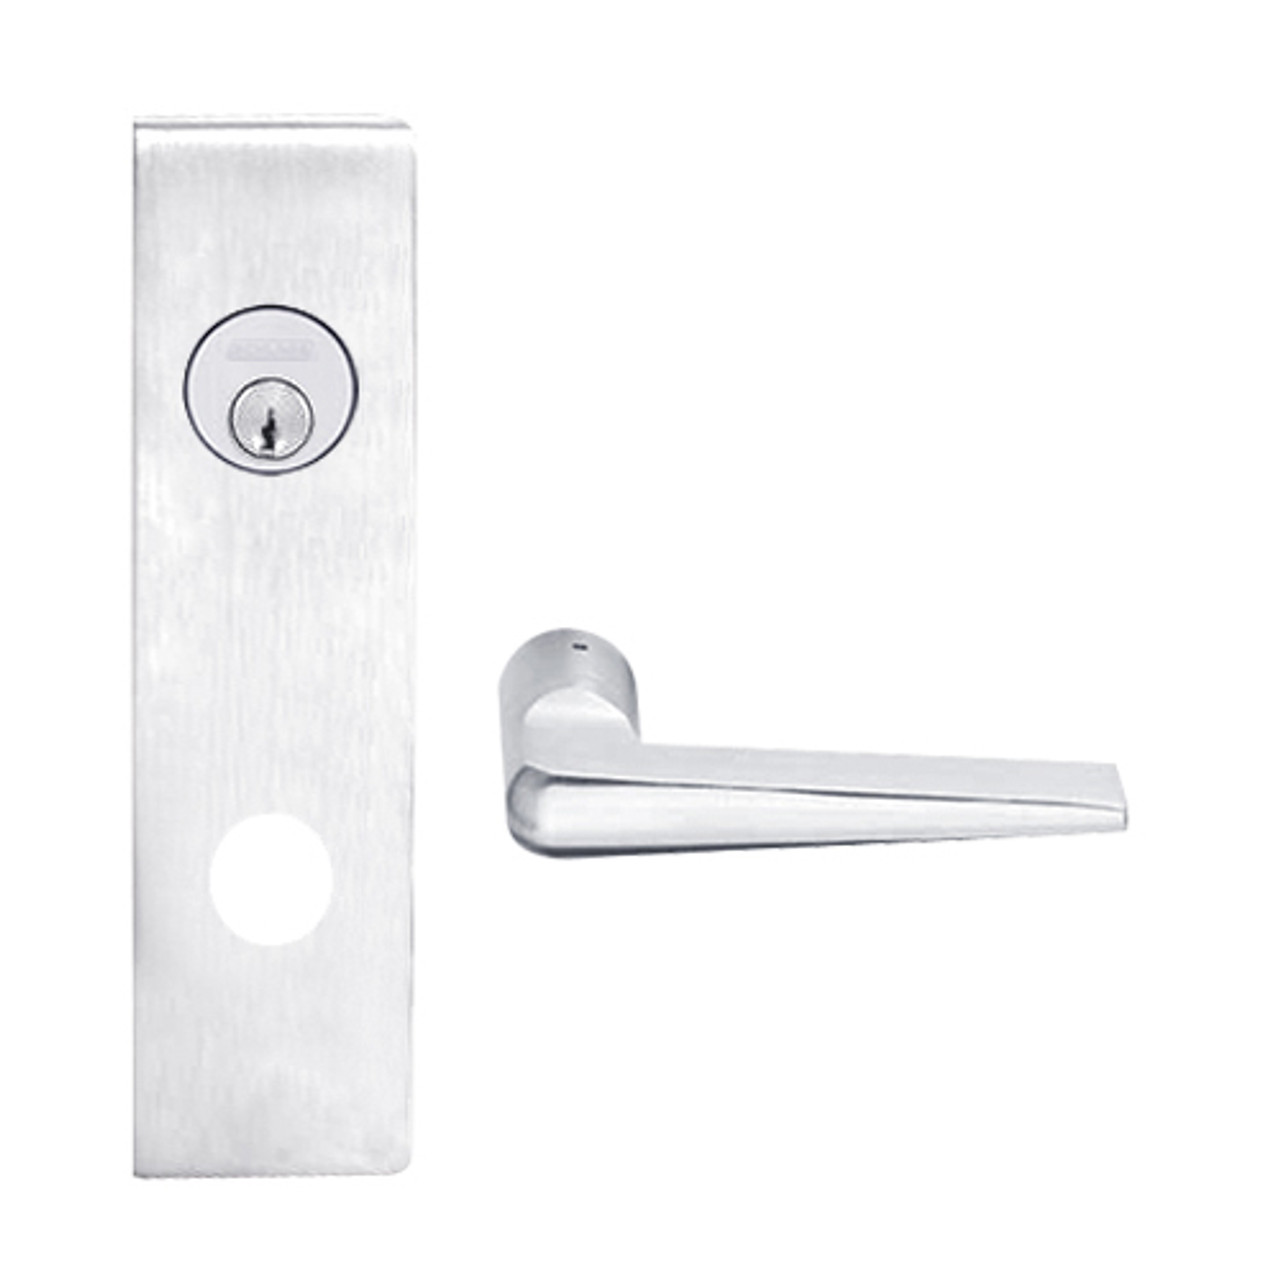 L9050L-05N-625 Schlage L Series Less Cylinder Entrance Commercial Mortise Lock with 05 Cast Lever Design in Bright Chrome